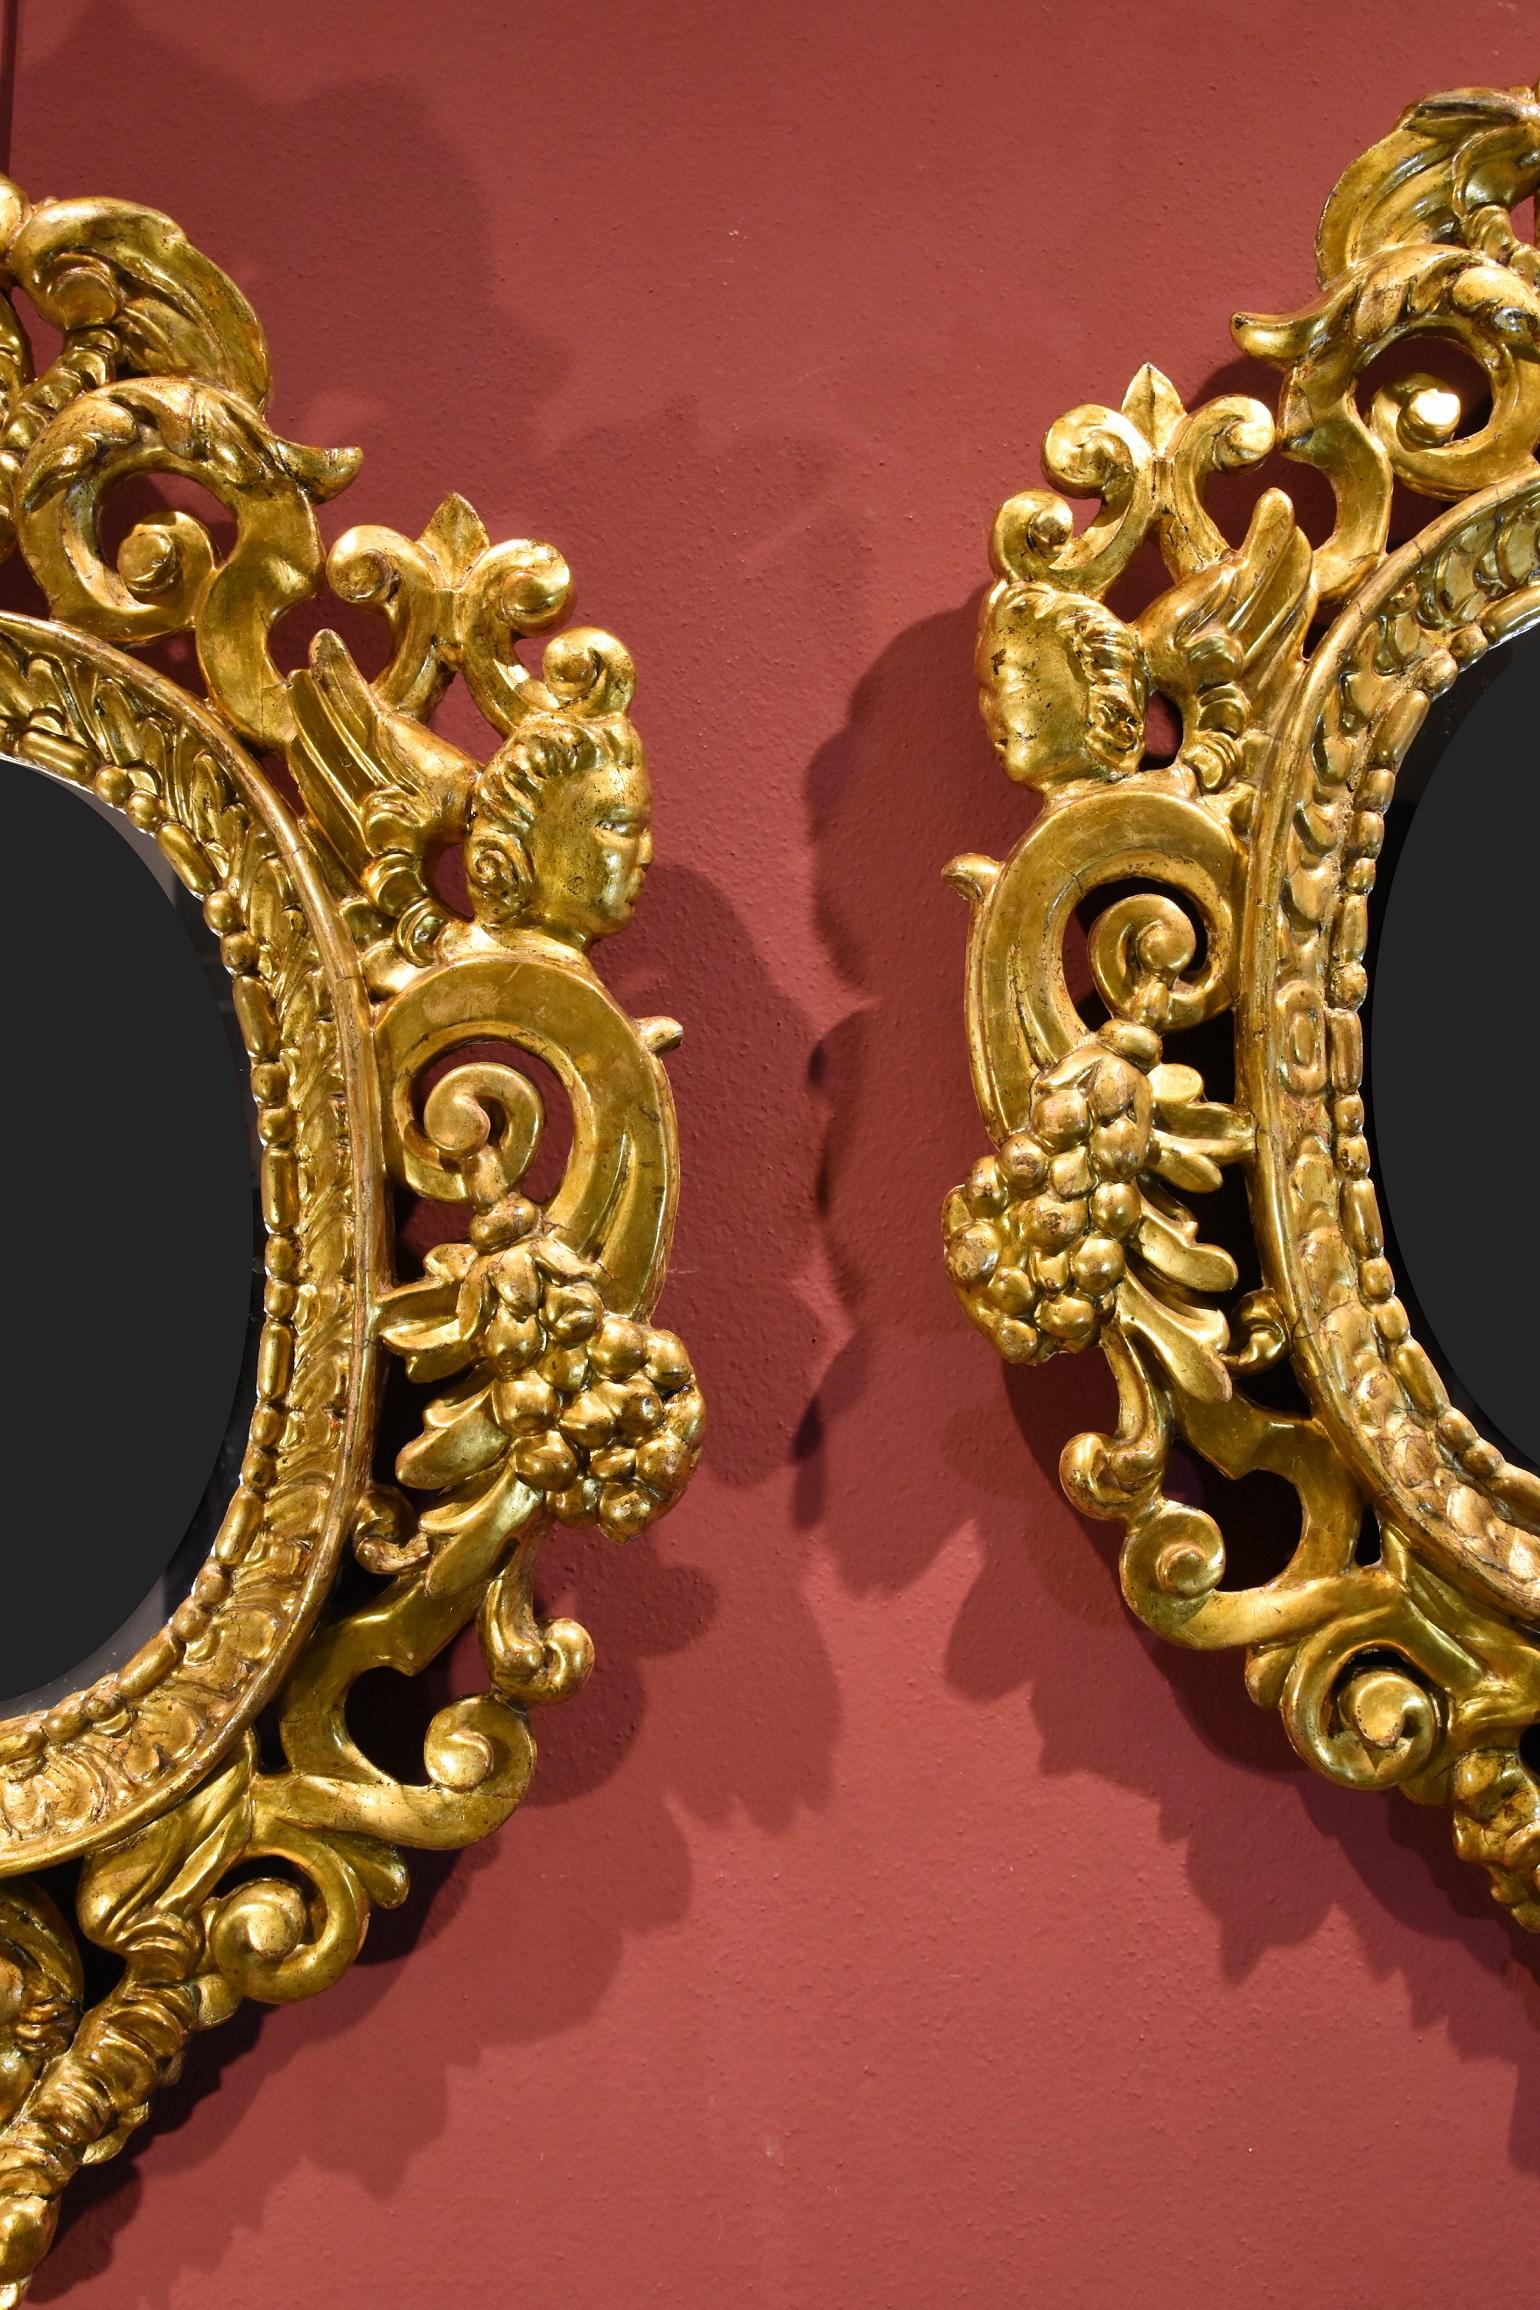 Pair Carved Gilded Mirrors Gold Wood Venice 18th Century Italy Quality Baroque For Sale 6